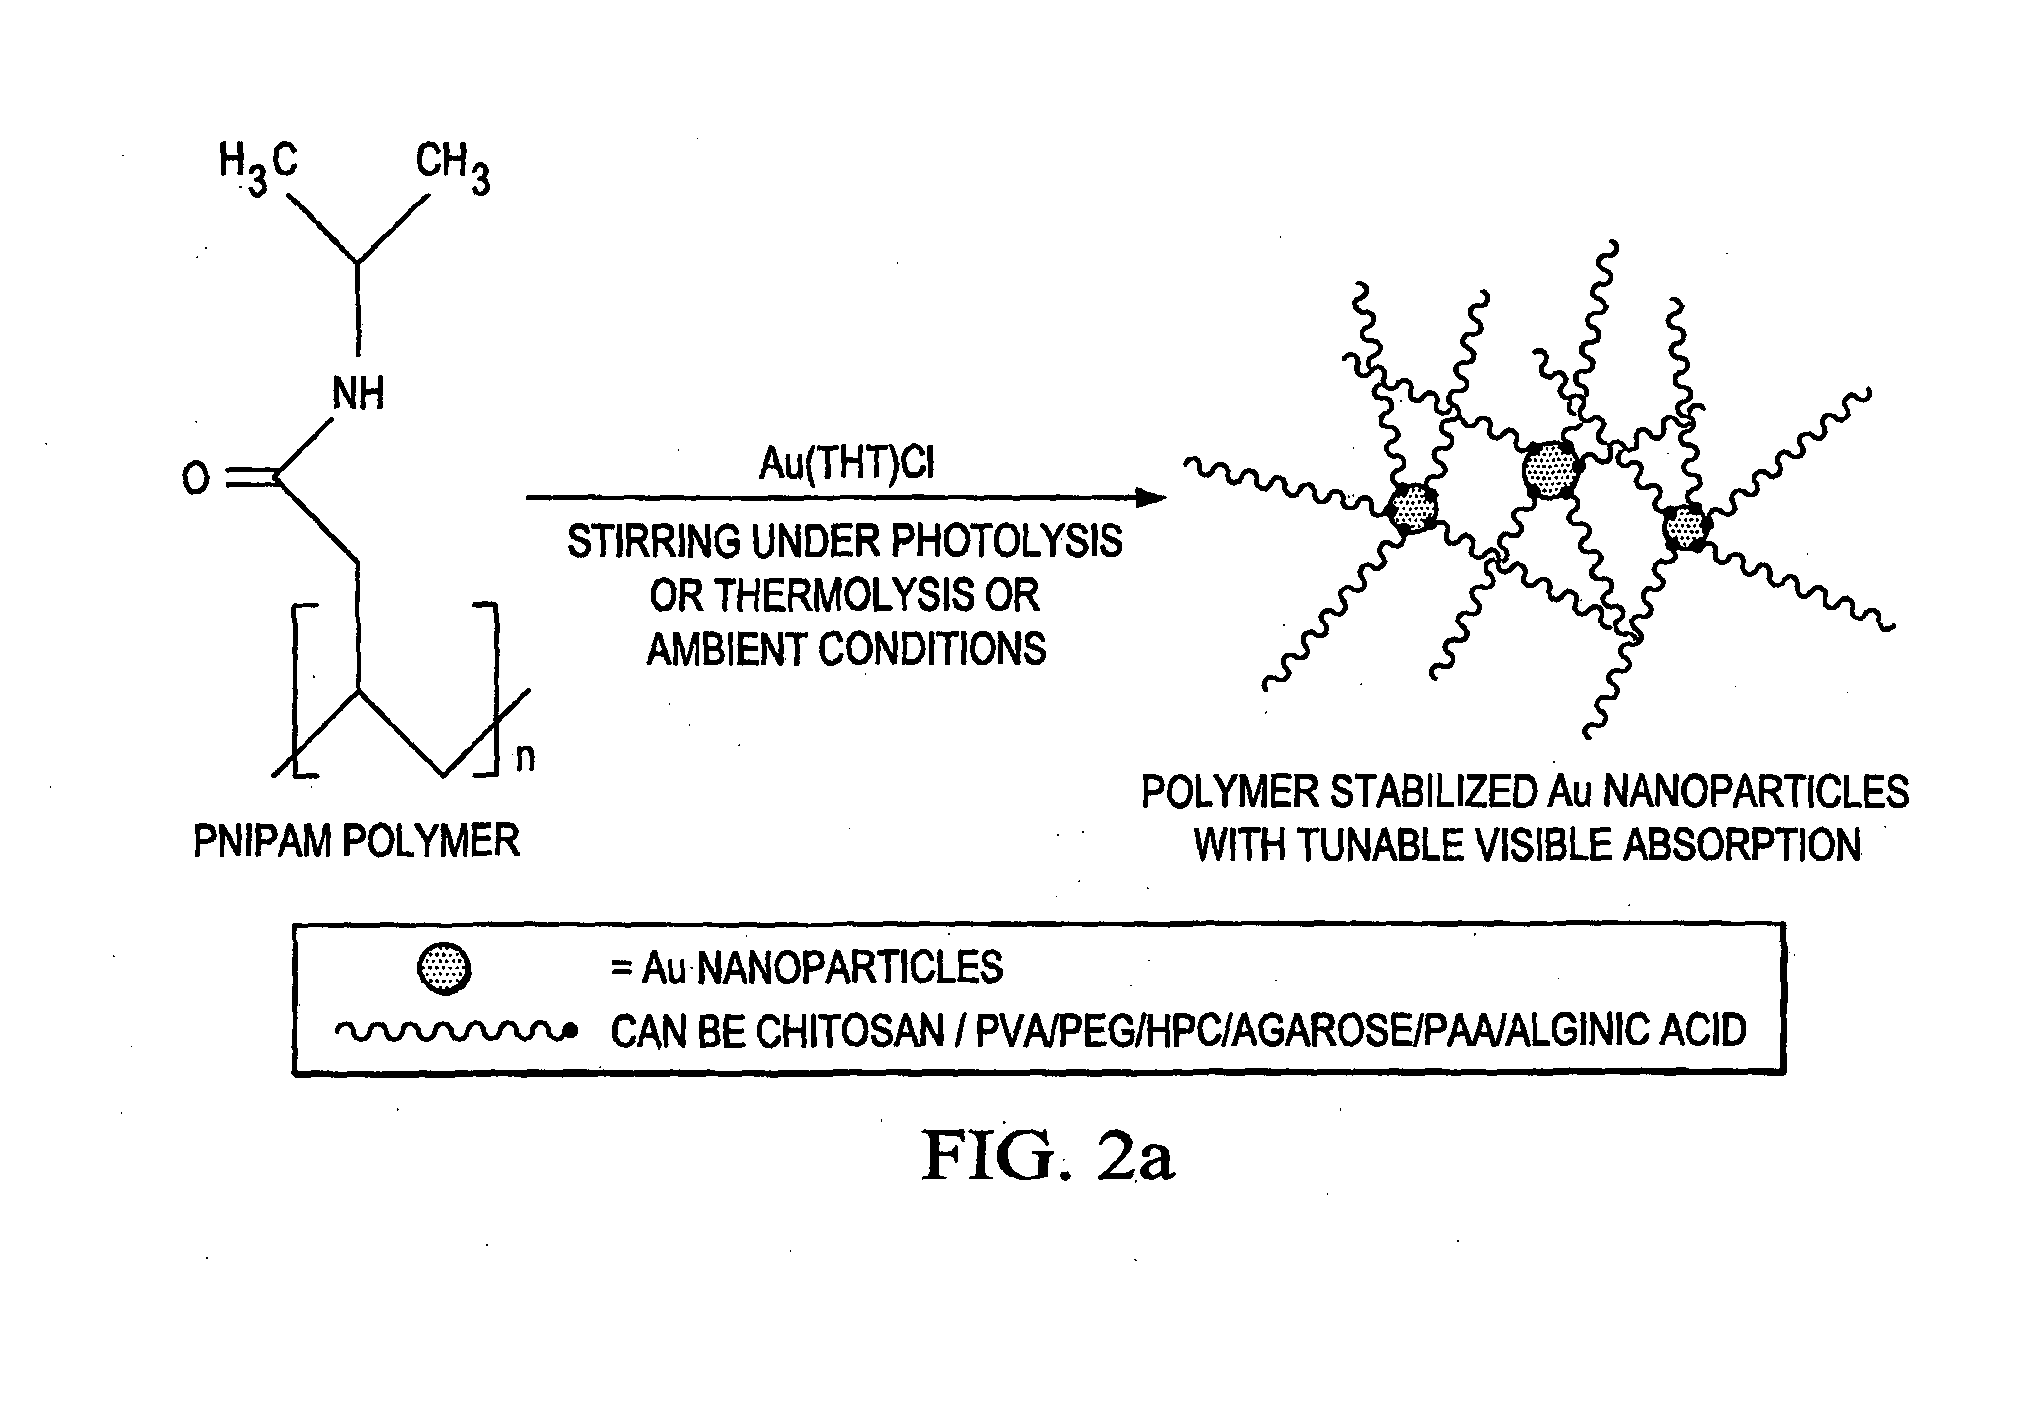 Facile Method for Making Non-Toxic Biomedical Compositions Comprising Hybrid Metal-Polymer Microparticles